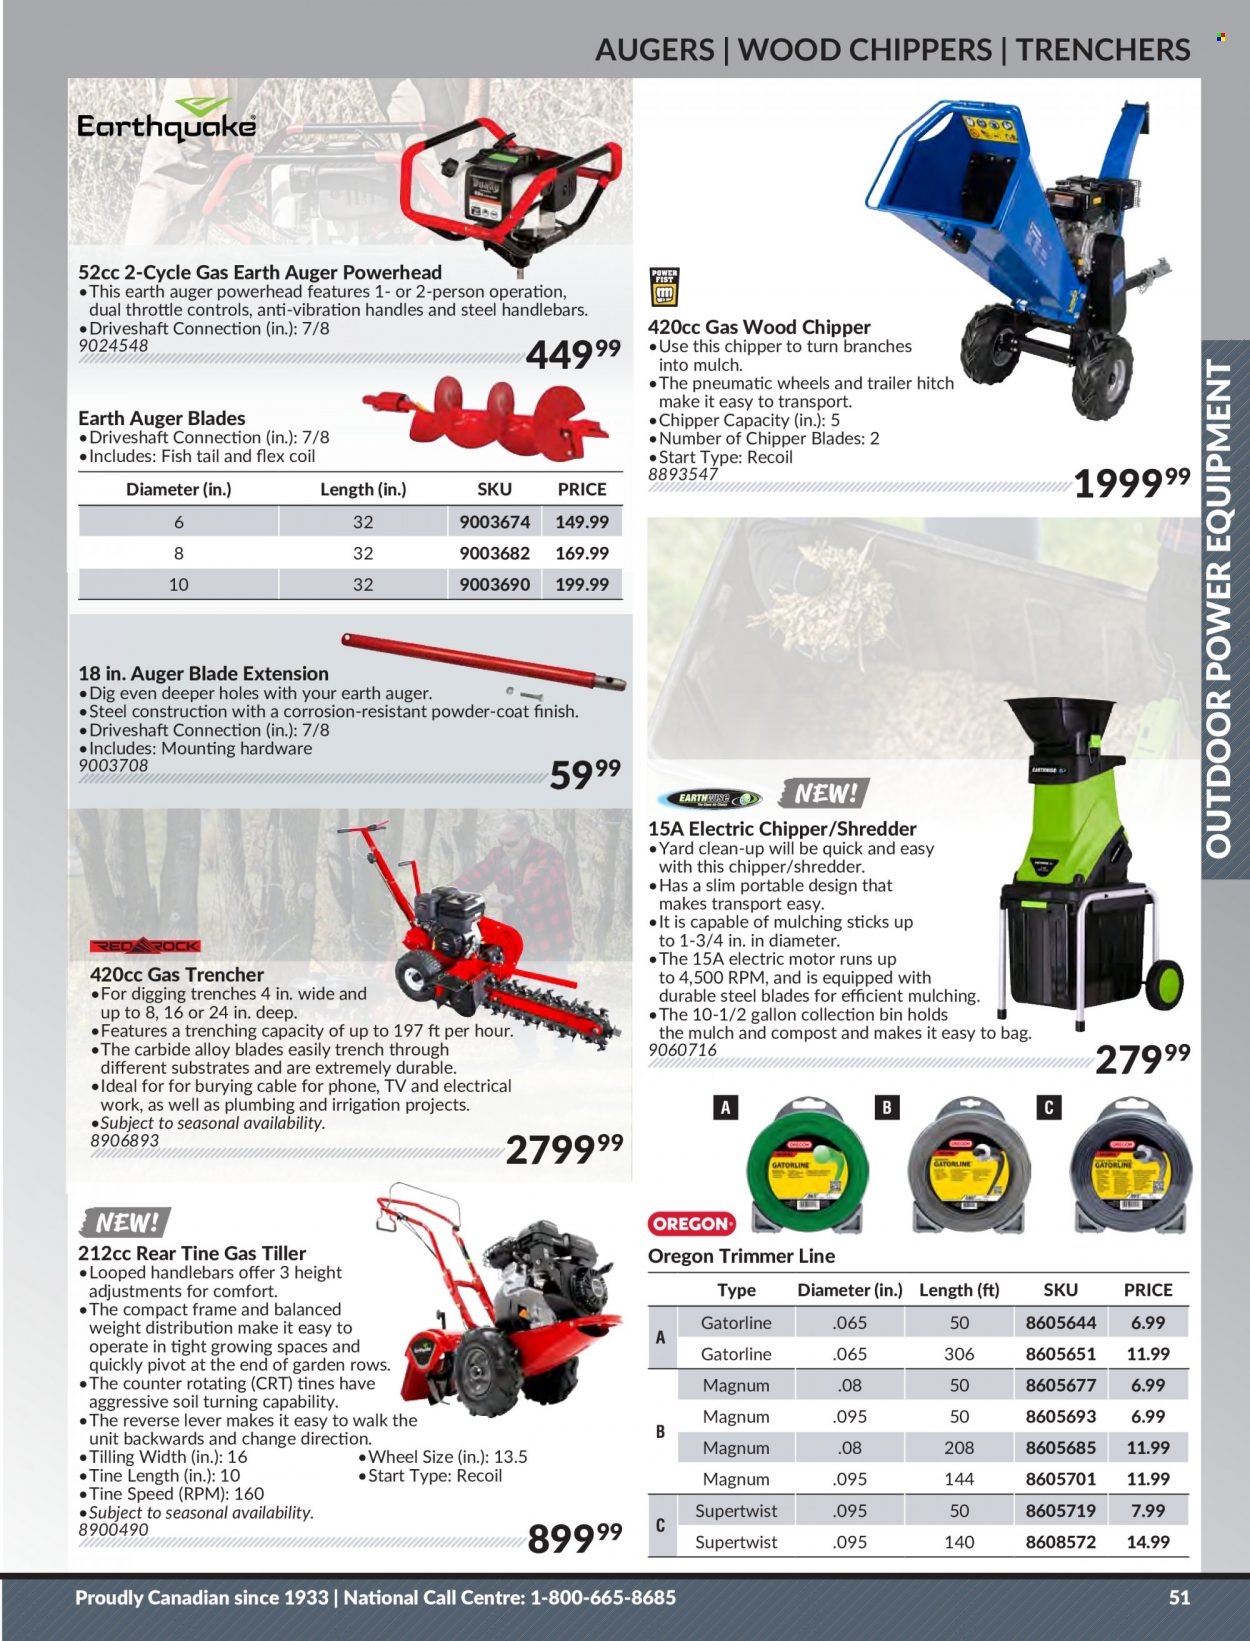 Princess Auto Flyer - Sales products - trimmer line, shredder, chipper, garden mulch, compost. Page 53.